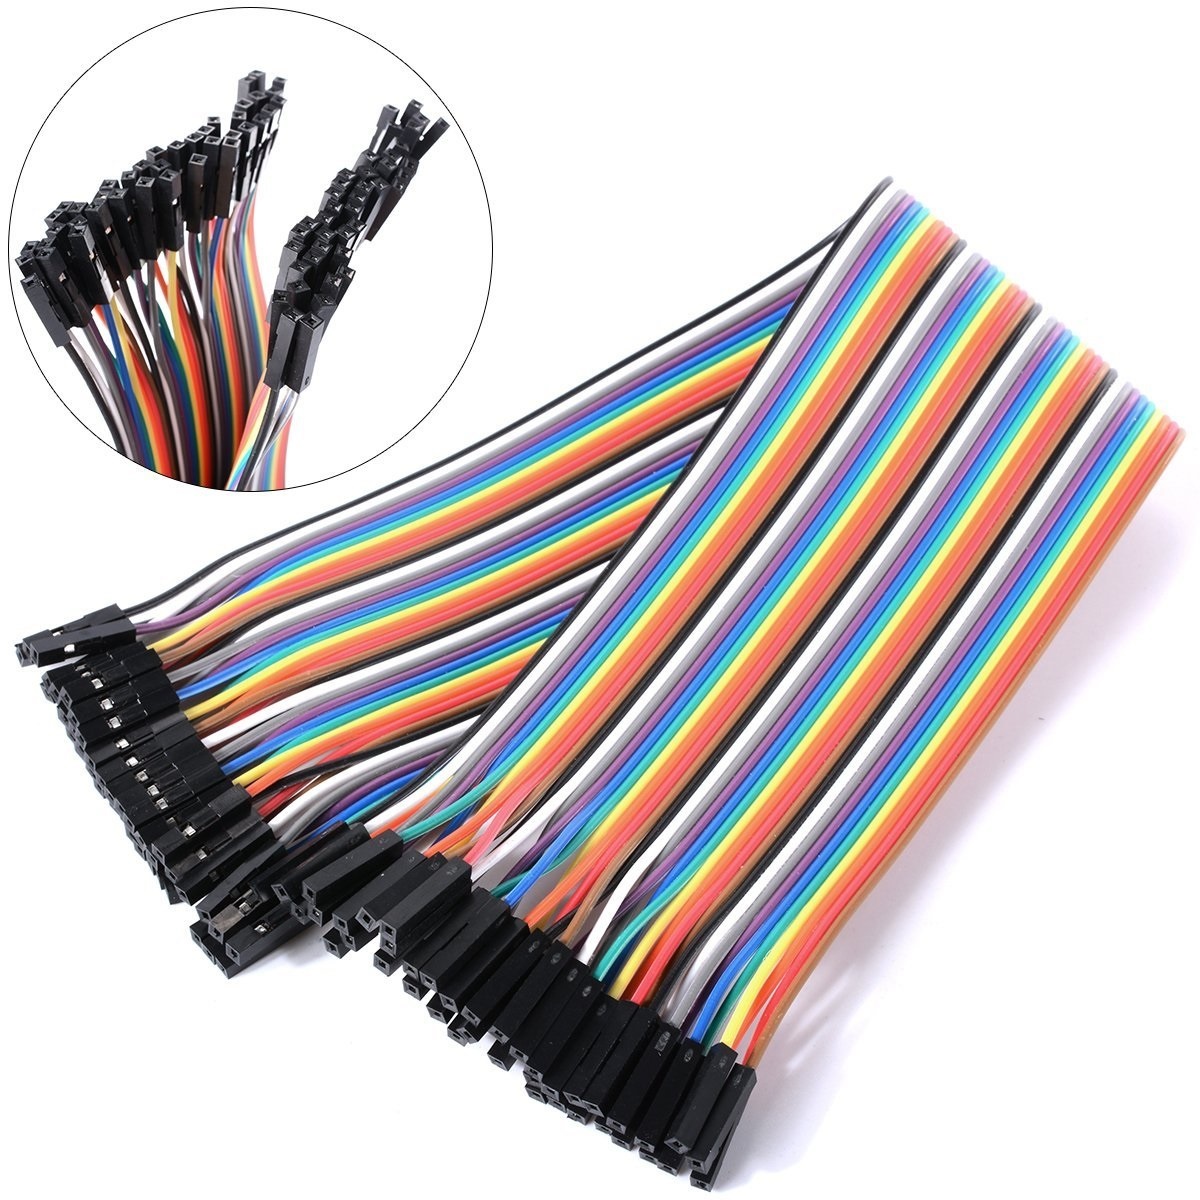 Female to Female Jumper Wire (Multicolor, 10cm Length) - 40 Pack